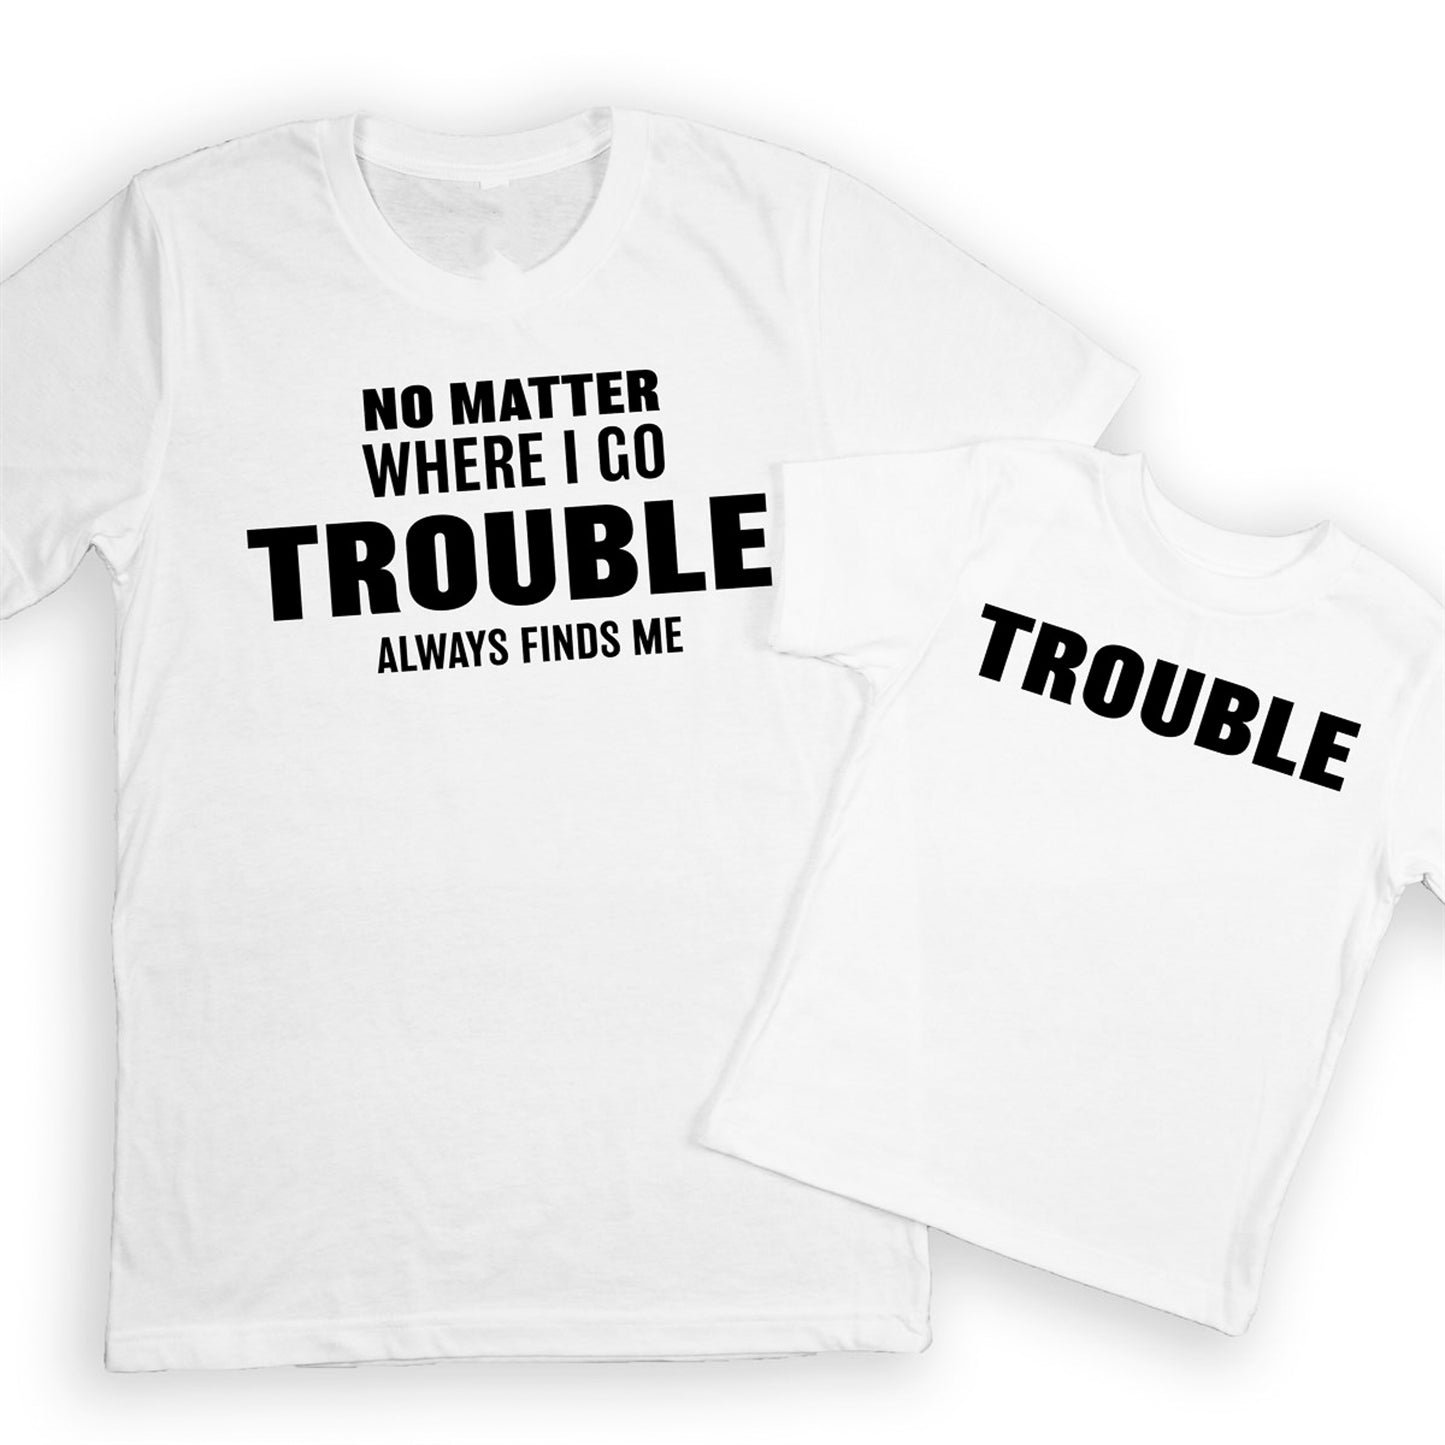 No Matter Where I Go Trouble Always Finds Me T-Shirt or Crew Sweatshirt